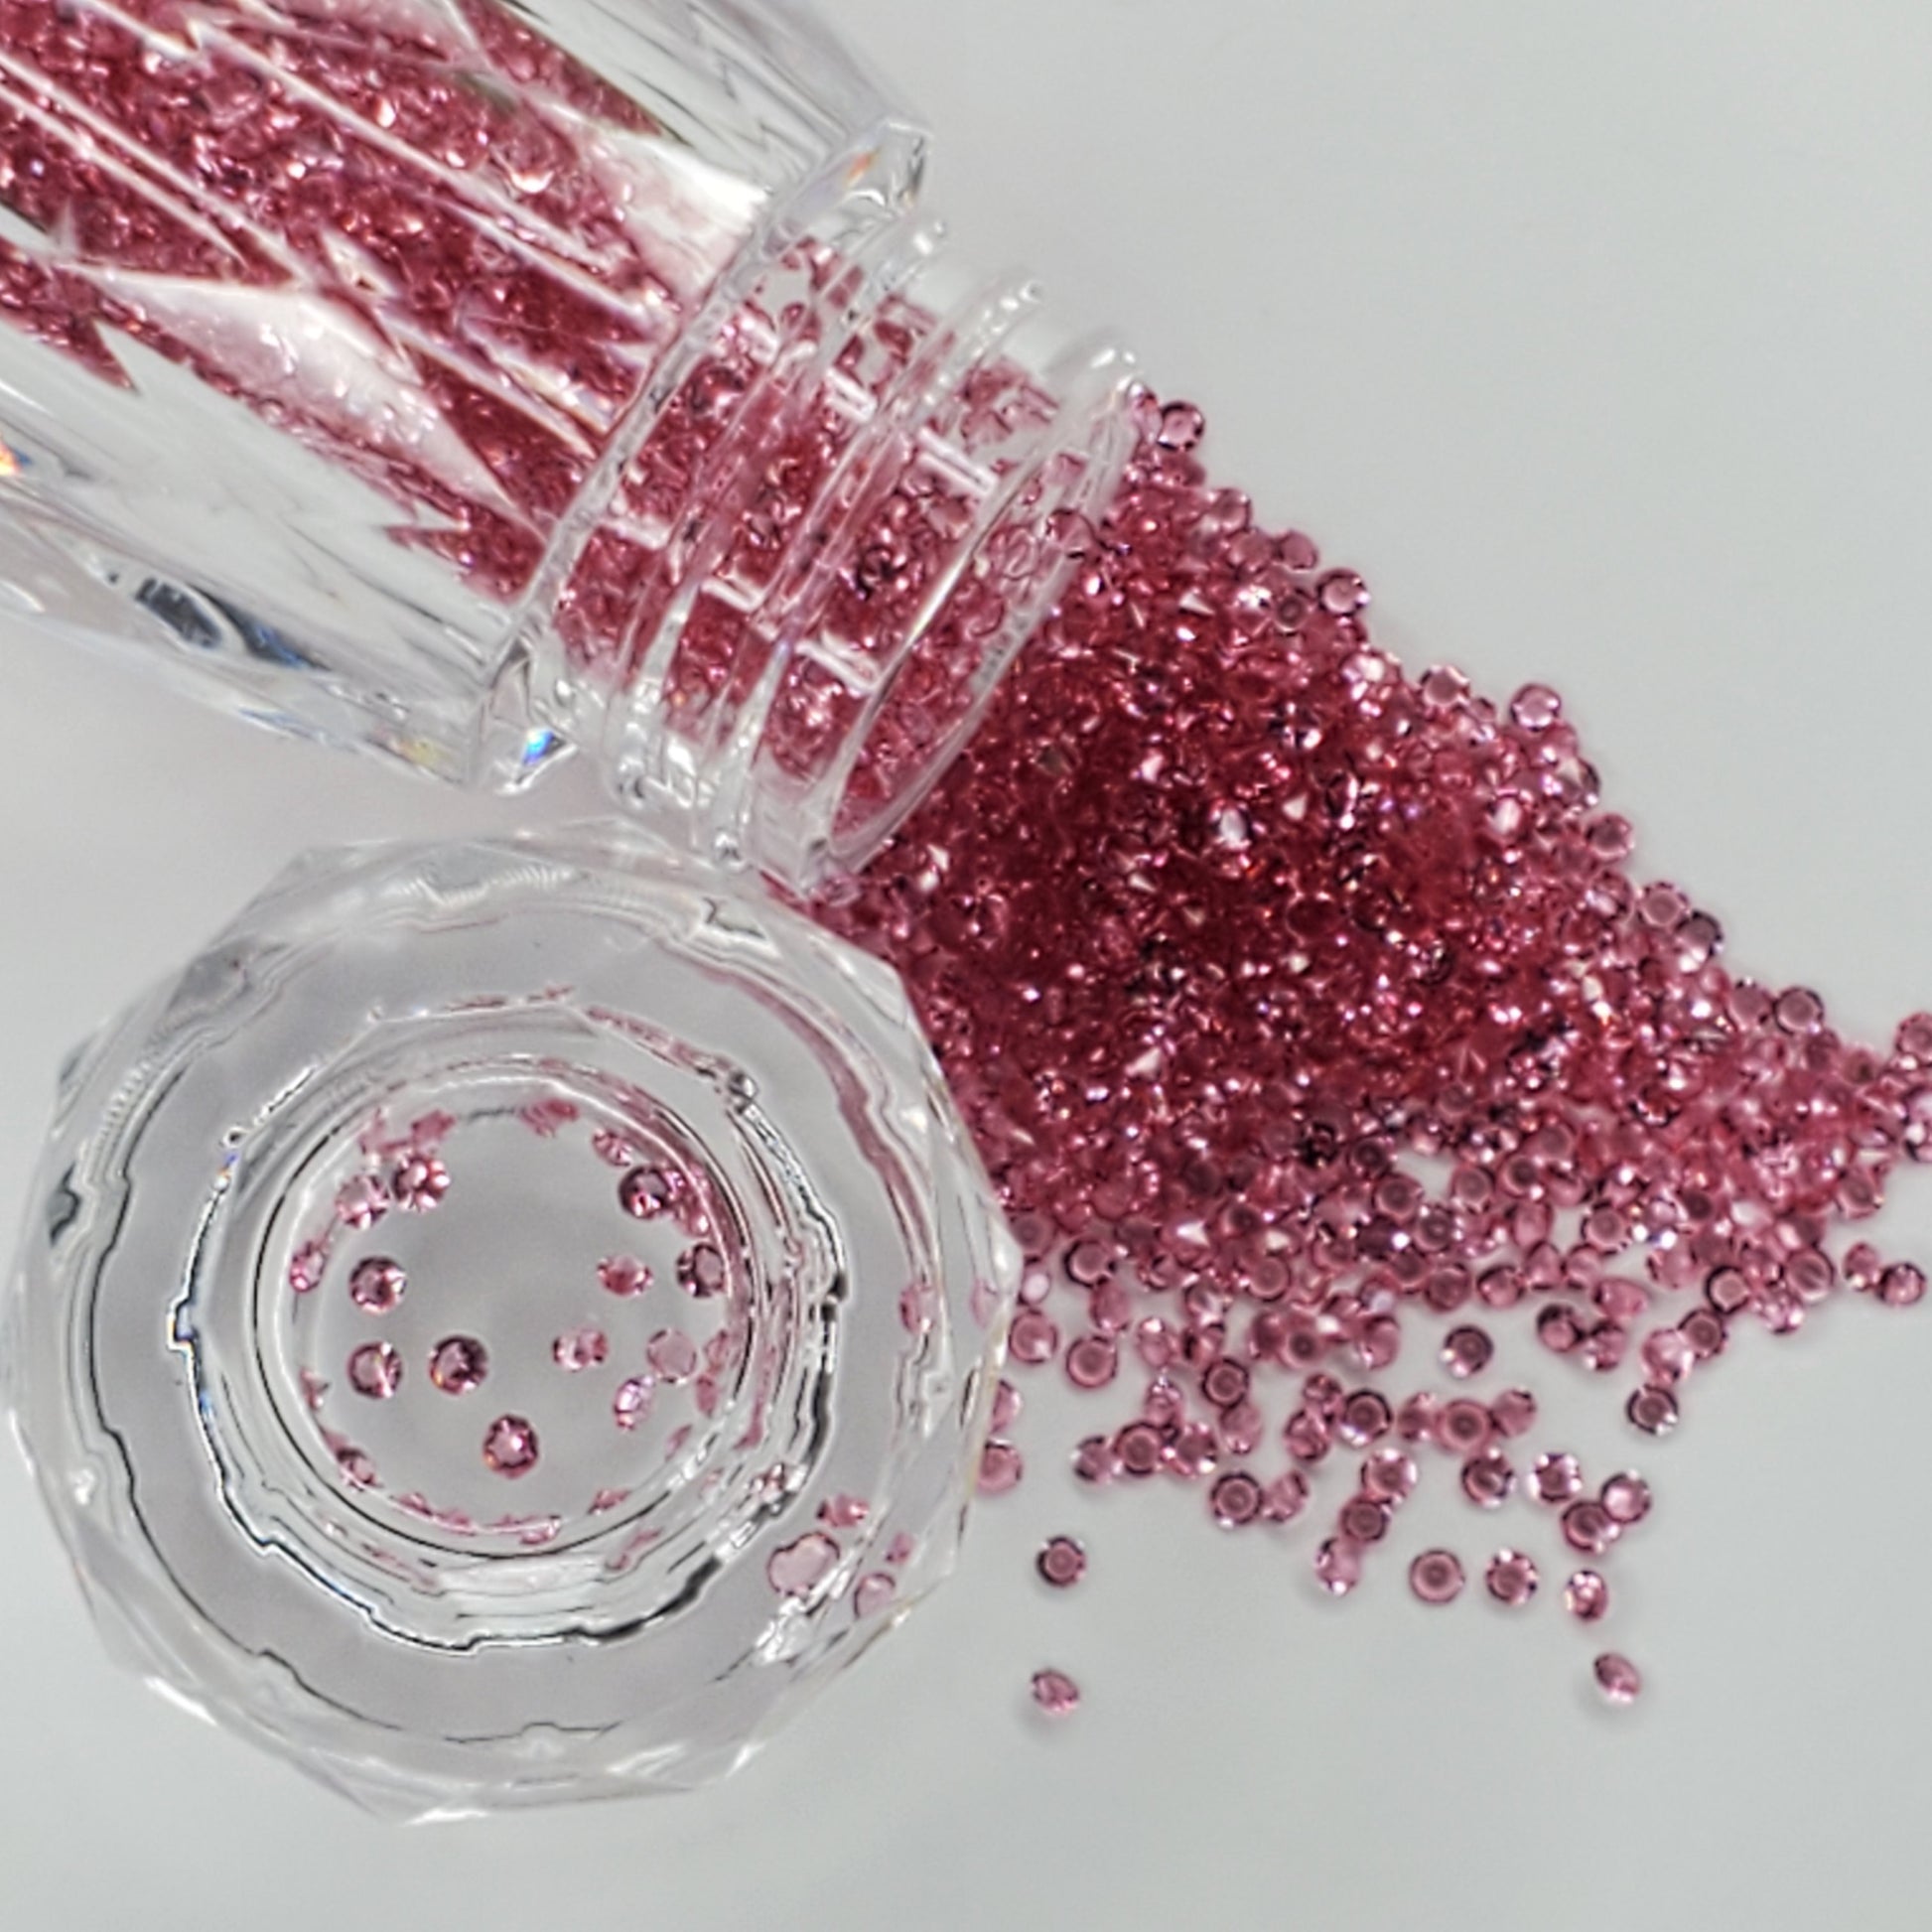 Pixie Dusty Rose Pink Rhinestones are high-quality SS2 or 1.2 mm glass Rhinestones. Perfect for rhinestone nail art